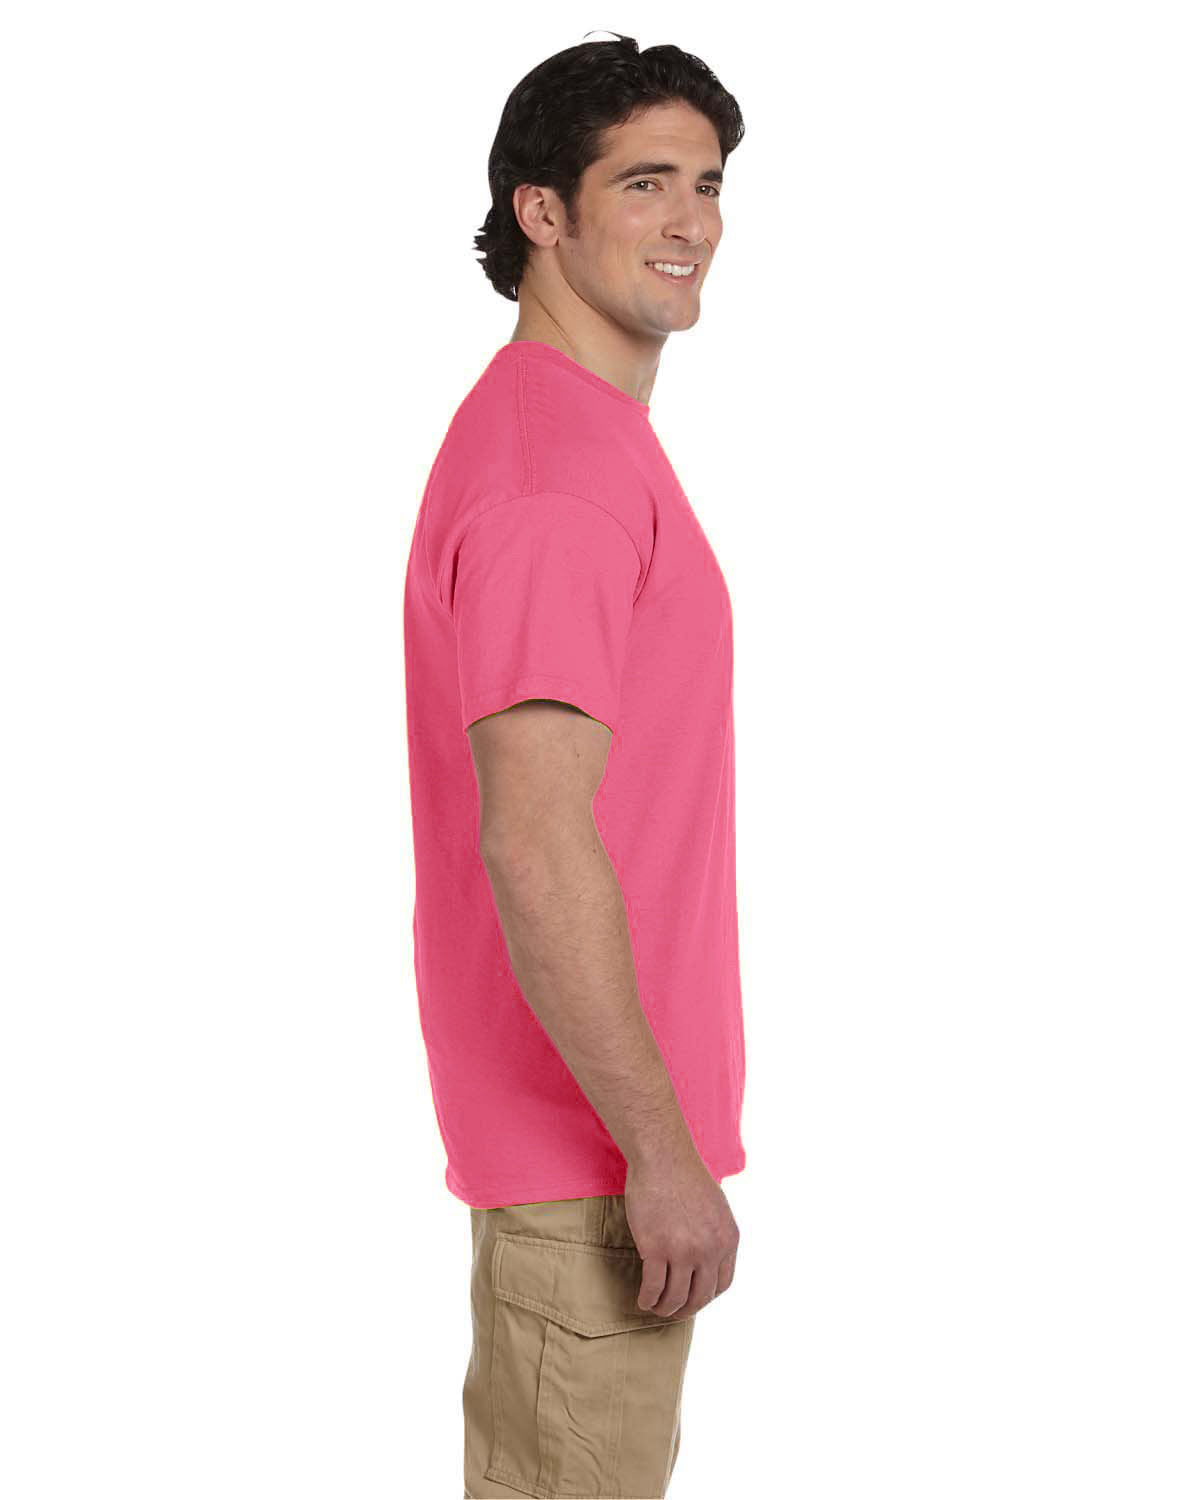 Adult Jerzees Brand 5.6oz 50/50 T-Shirt Color-Cyber Pink 4XL